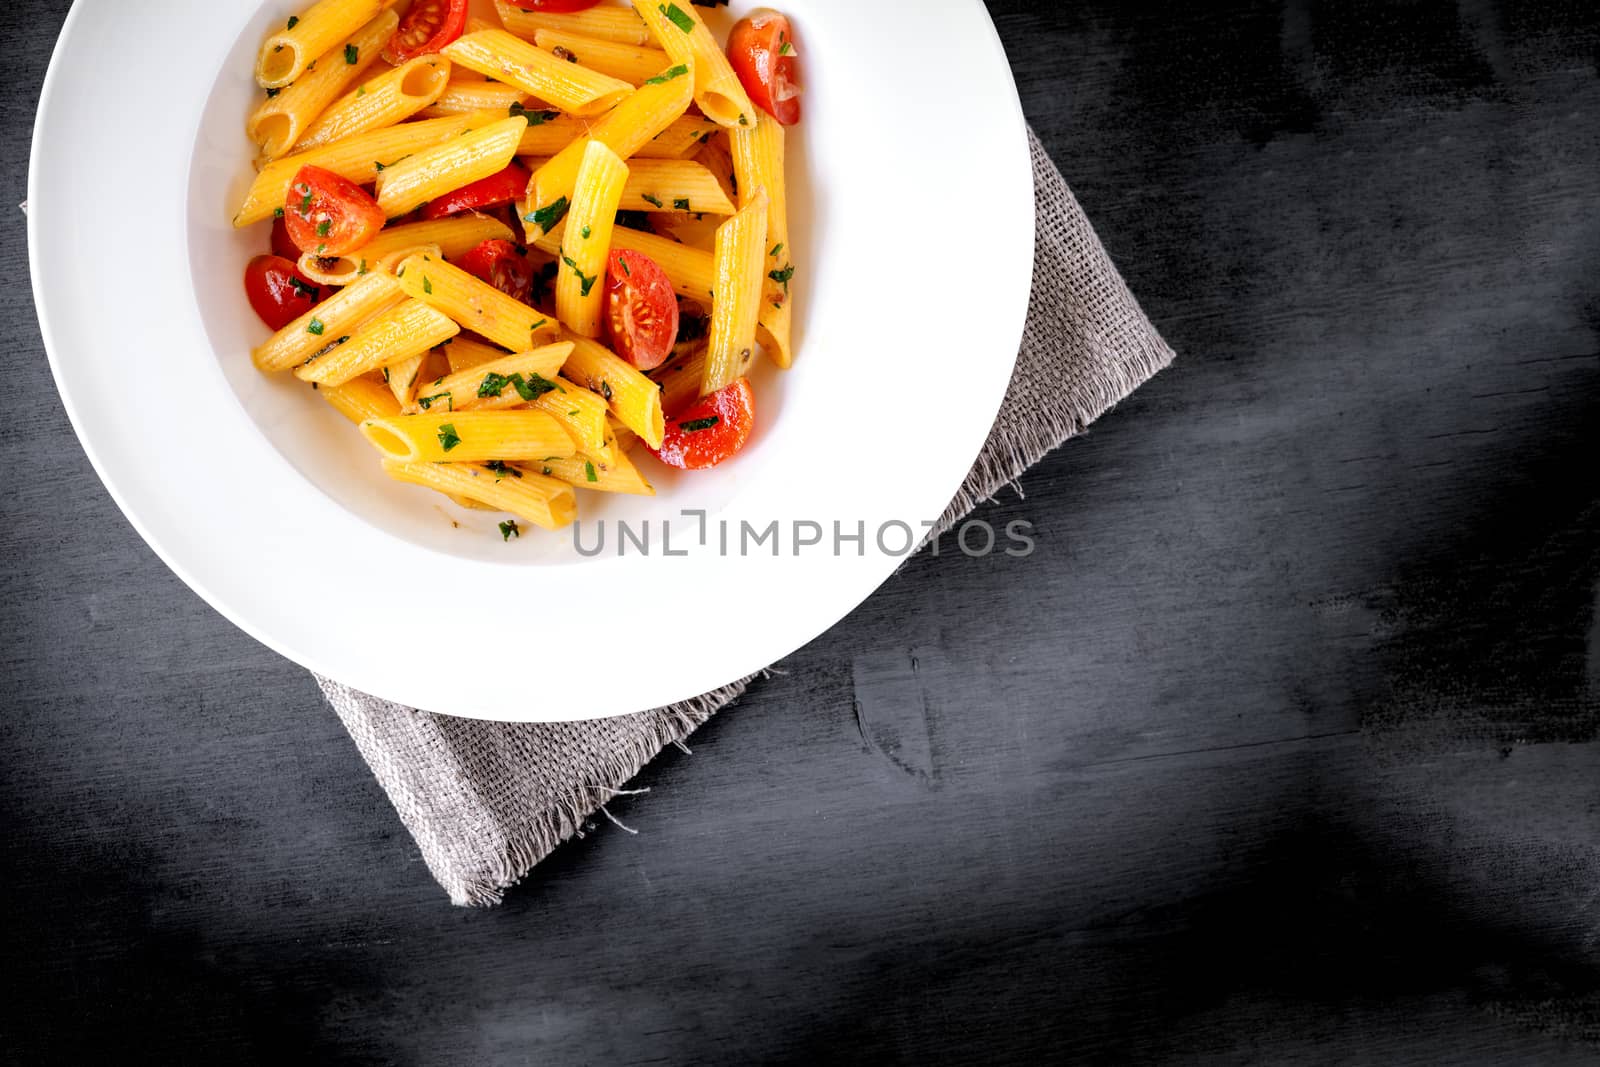 Penne with anchovy and tomato in a white plate